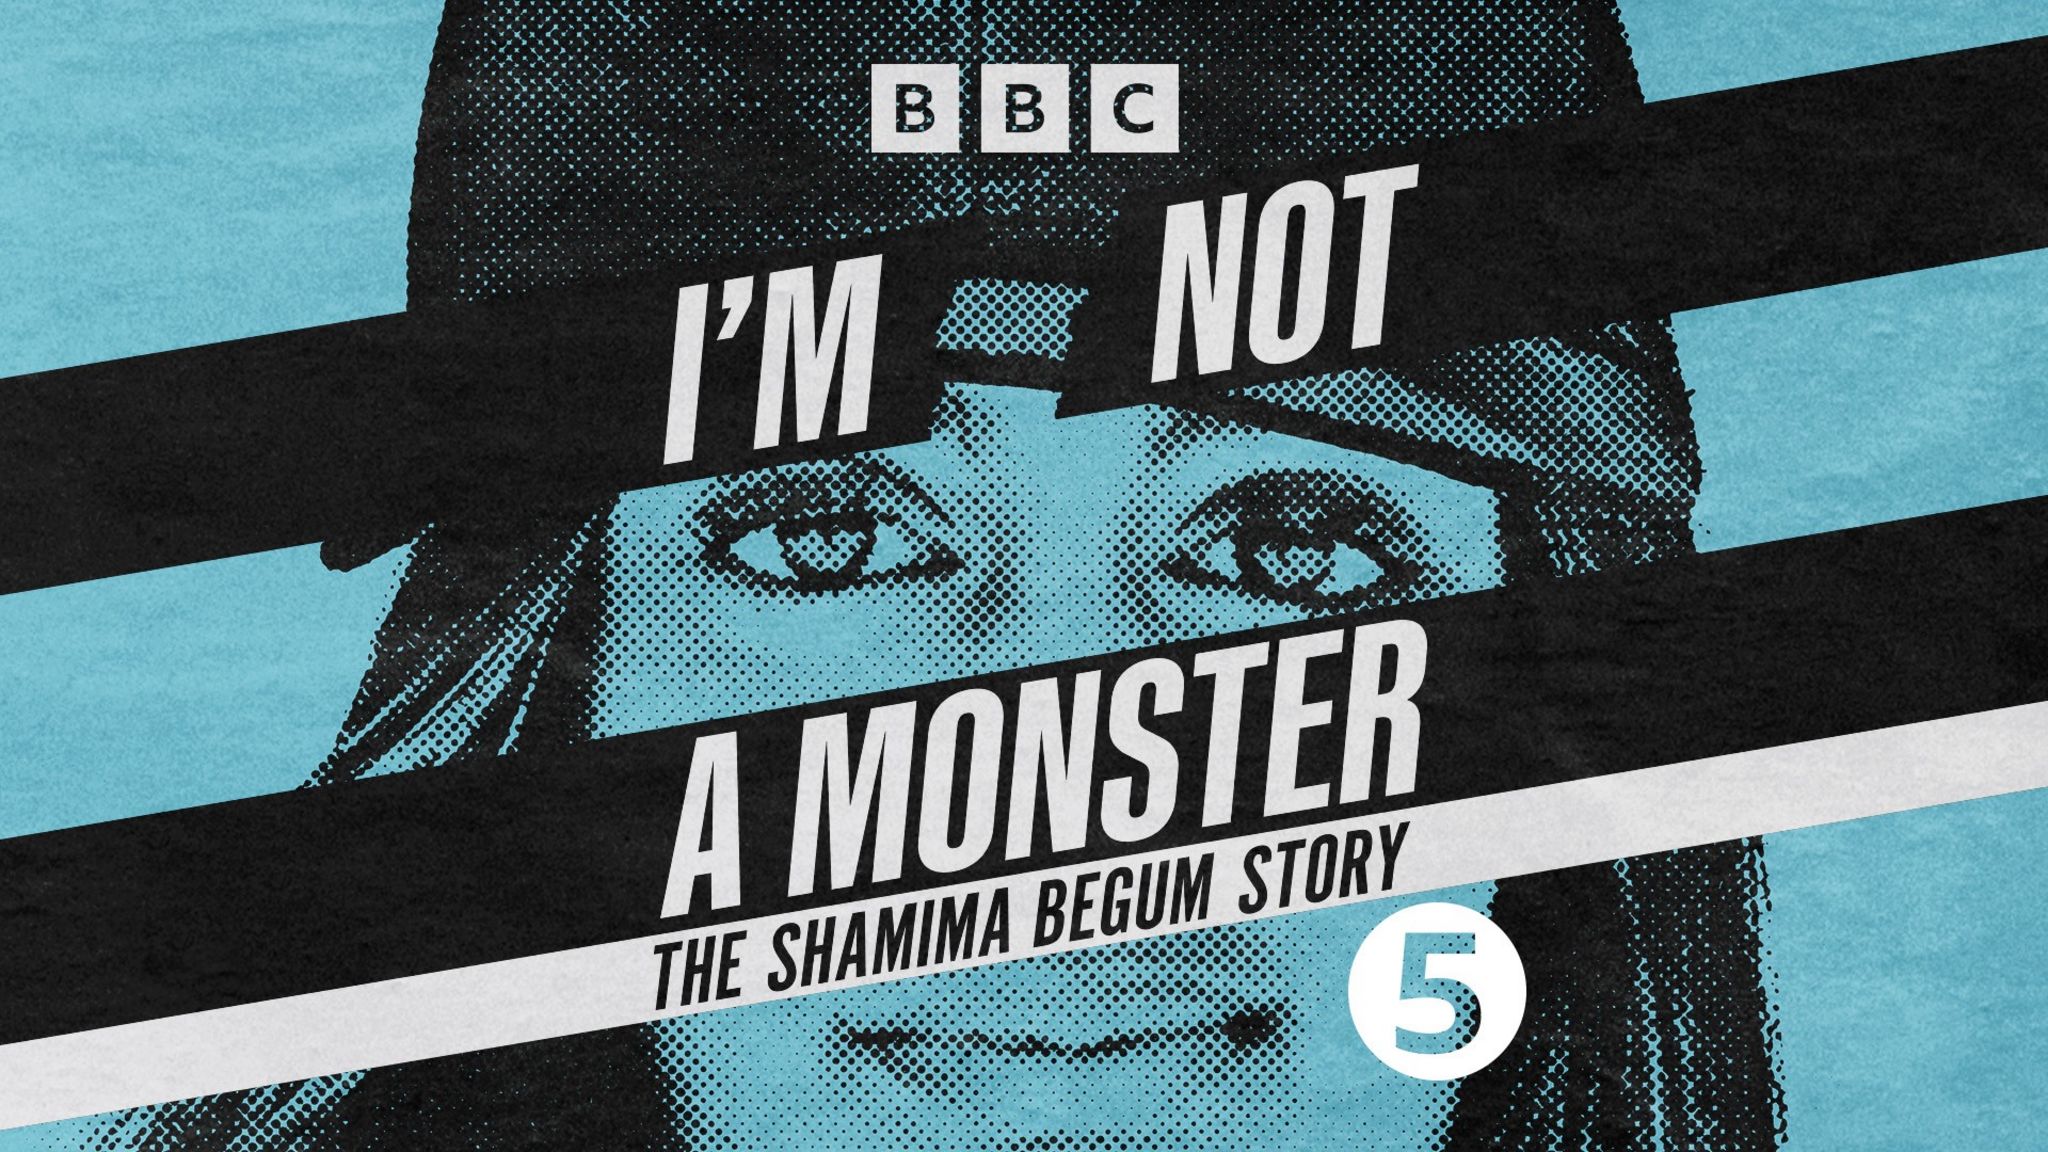 I'm Not A Monster promo image